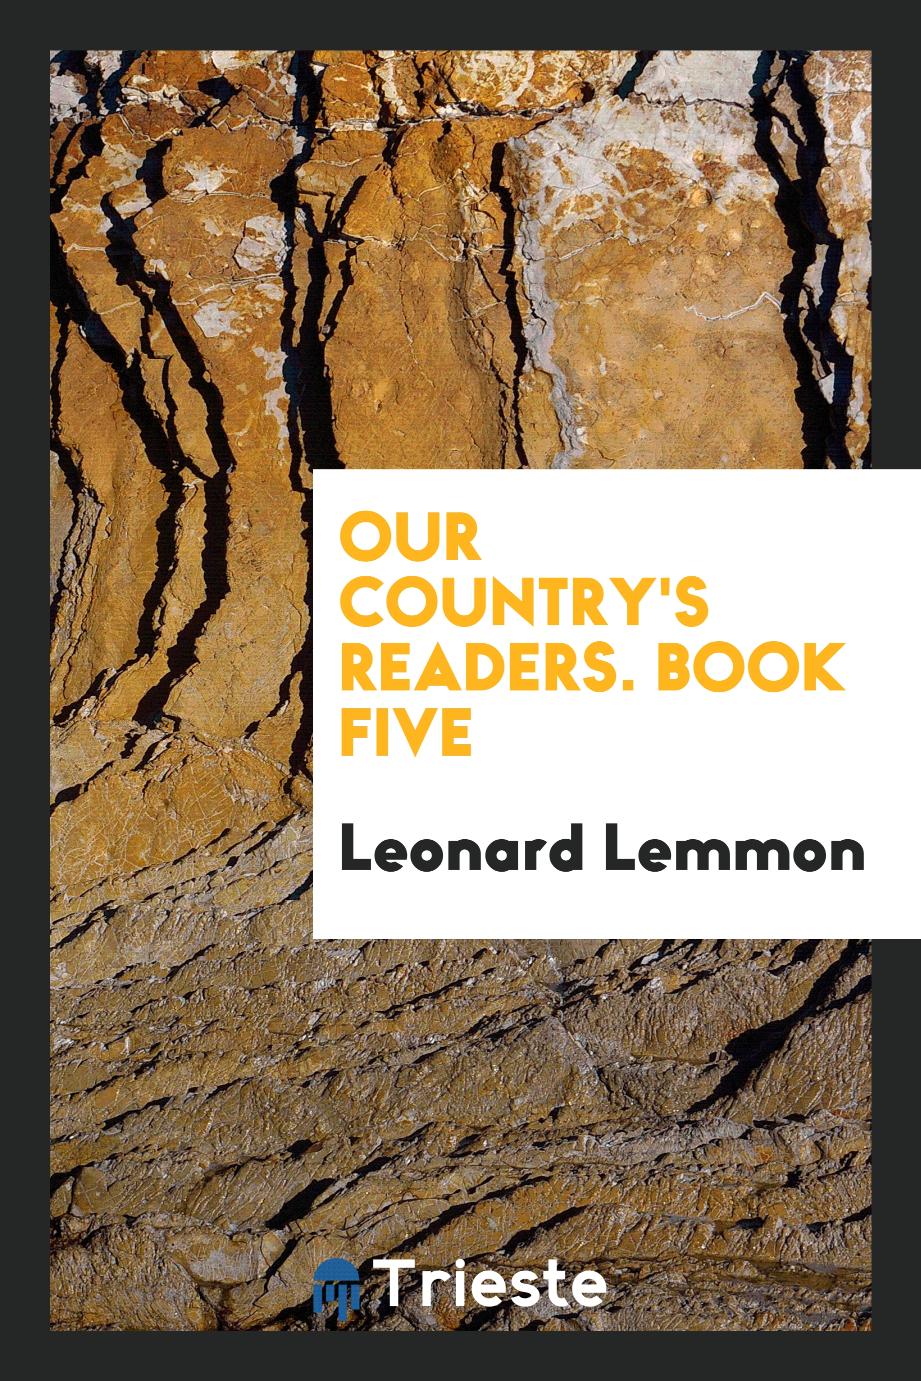 Our Country's Readers. Book Five